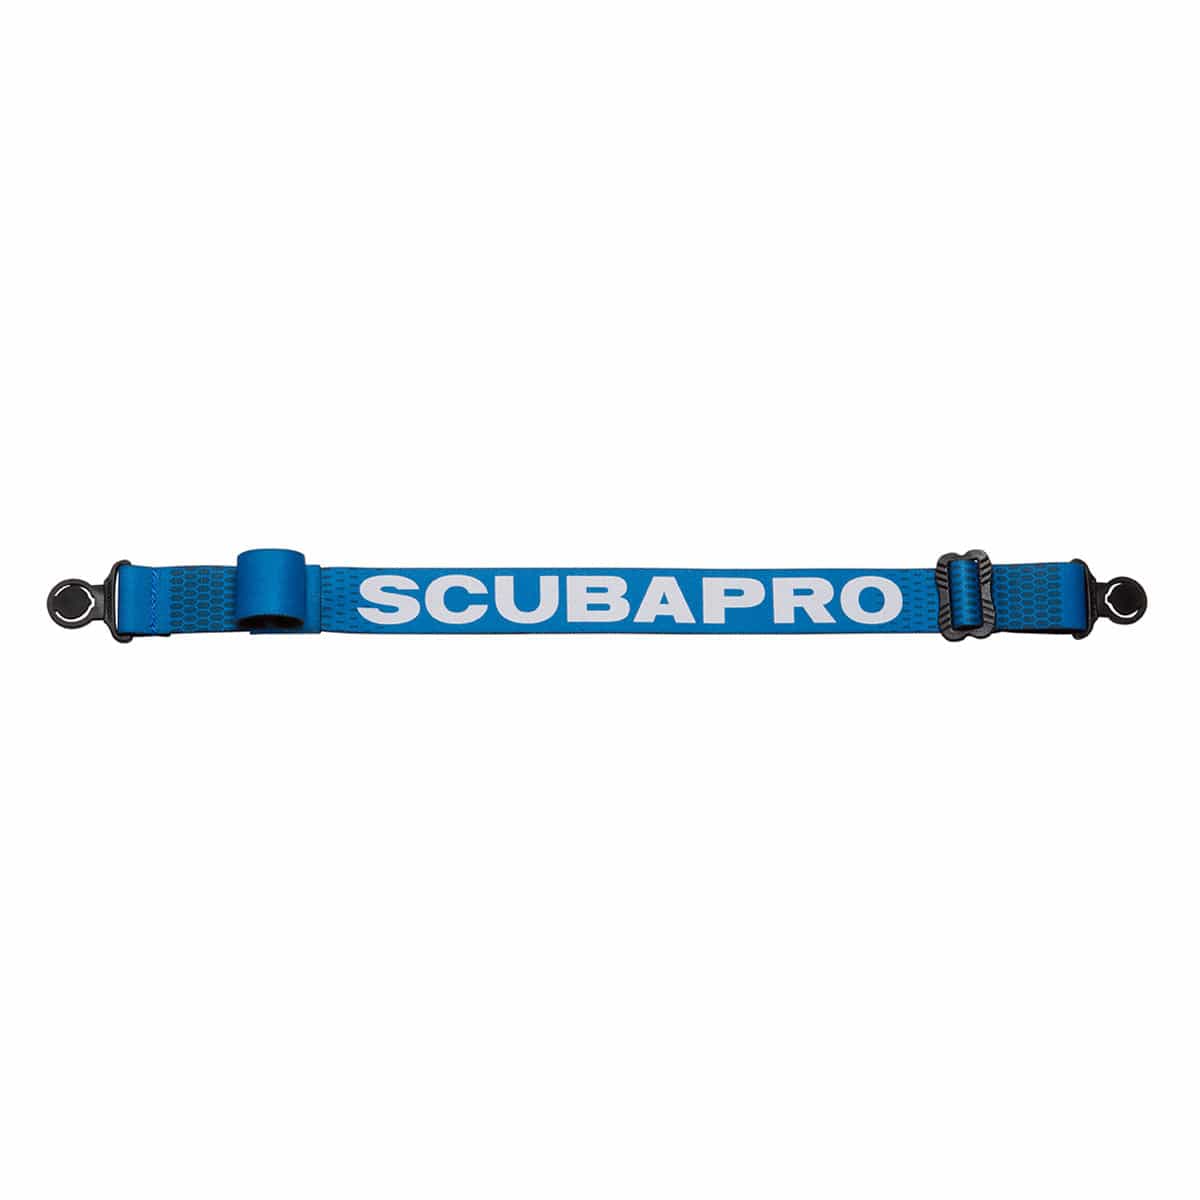 Scubapro Comfort Strap - Turquoise - 24.730.020-NED - 20